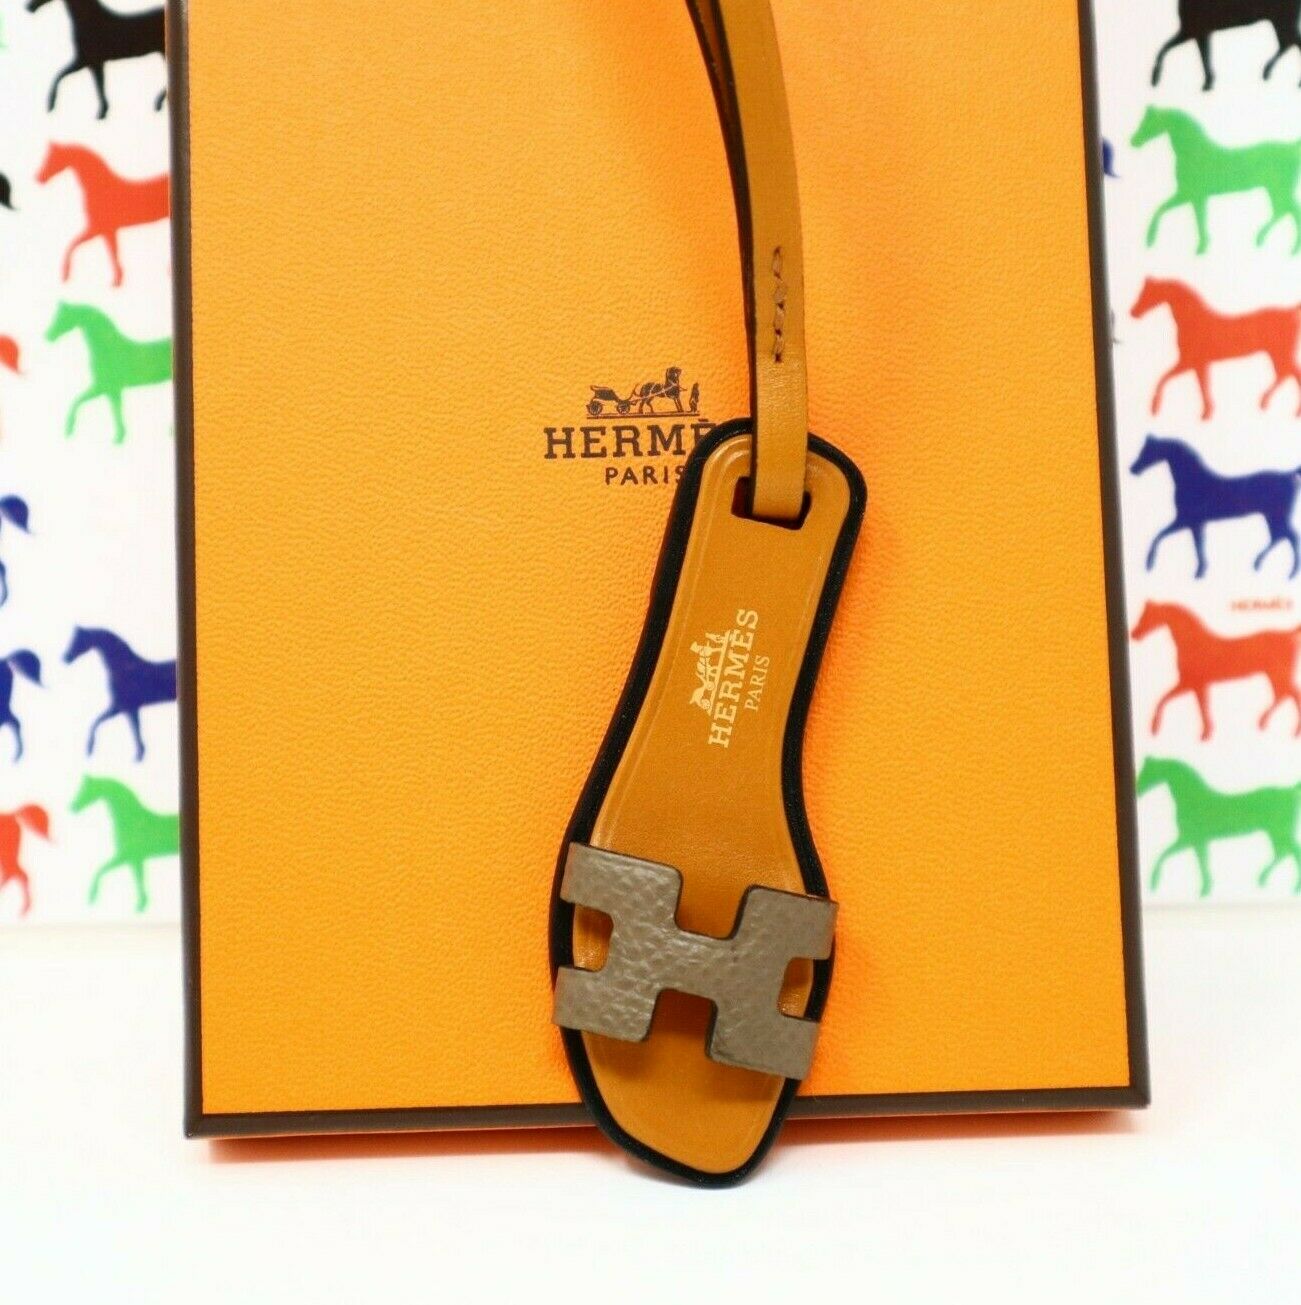 Hermes, Accessories, Herms Rodeo Bag Charm